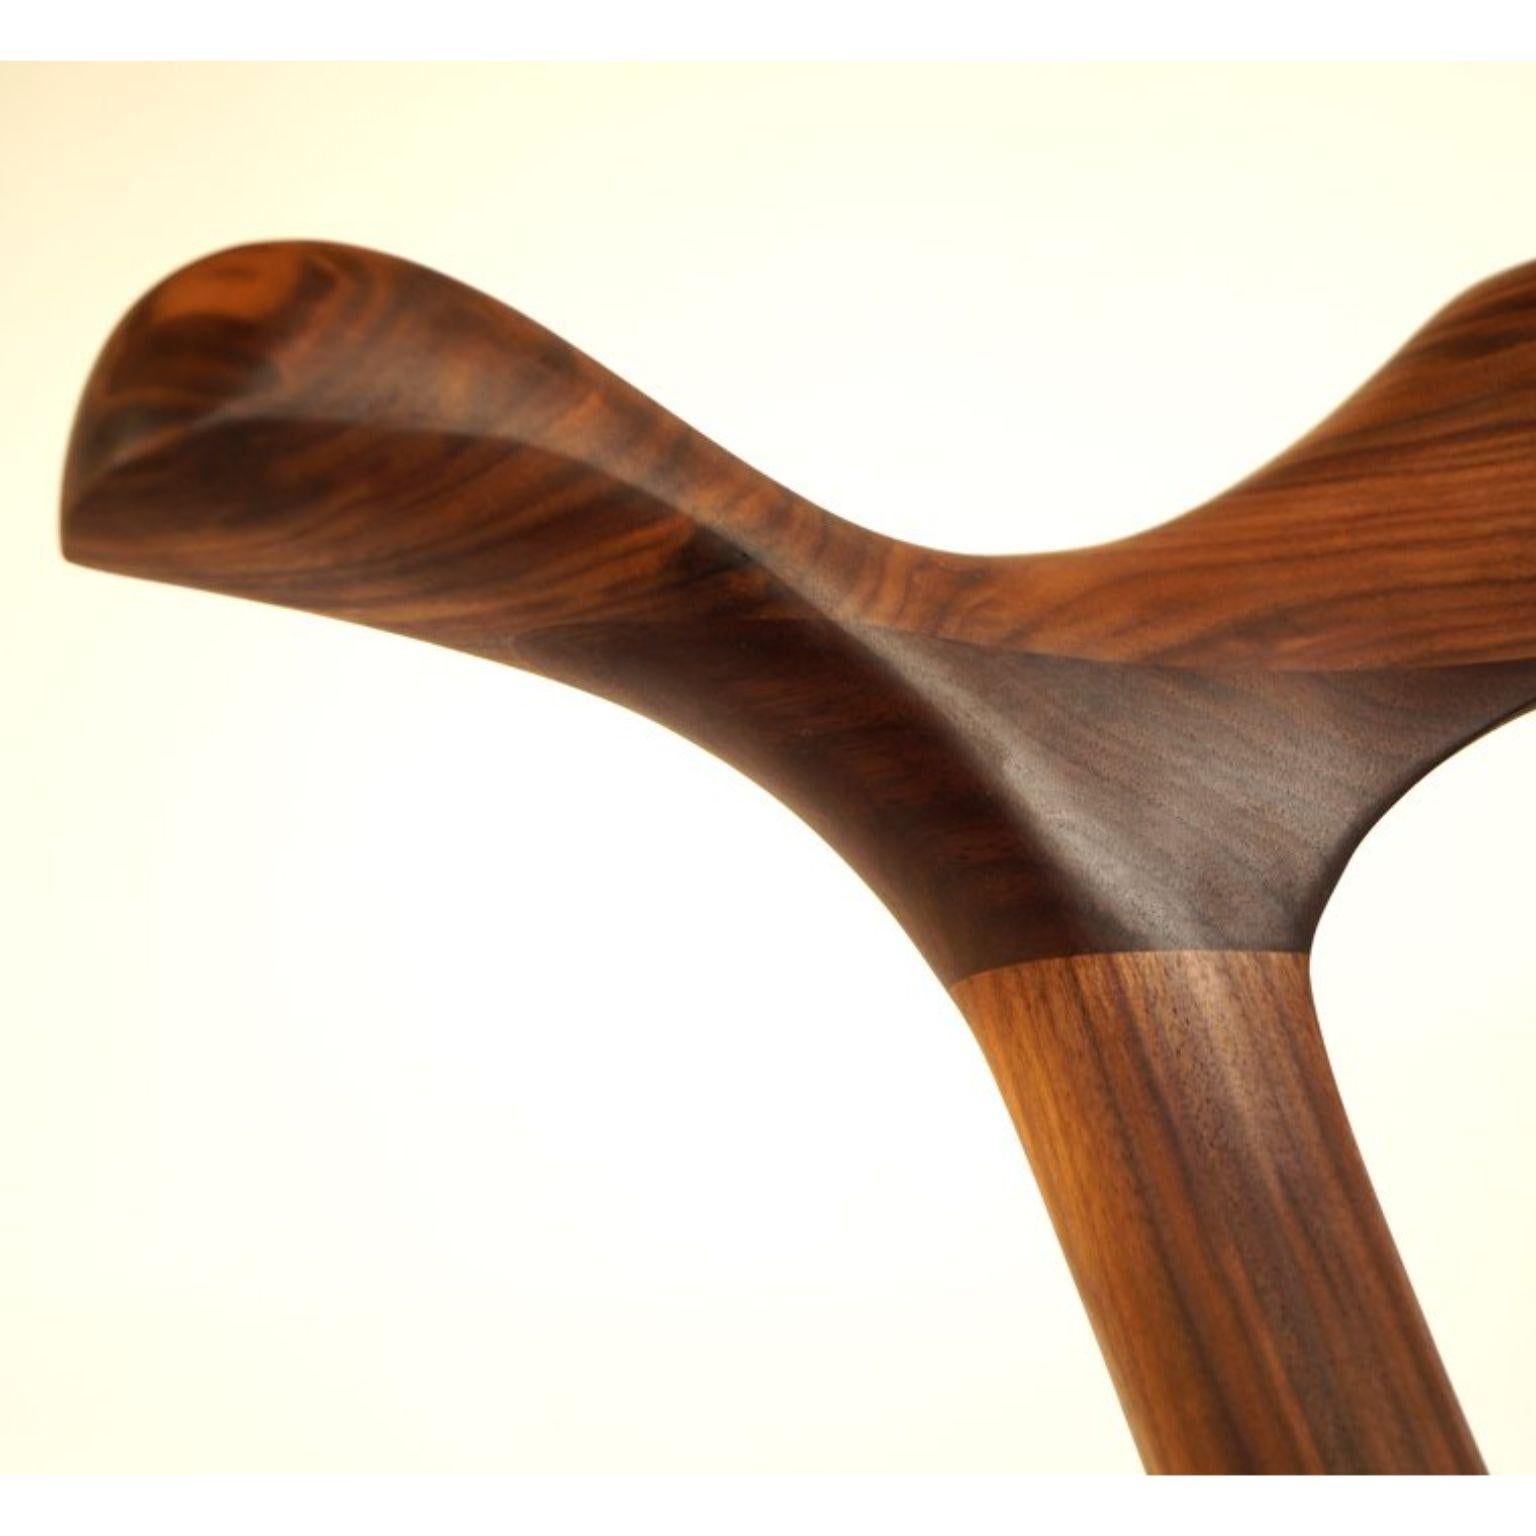 Contemporary Flamingo Beak Dining Room Chair Handcrafted and Designed by Morten Stenbaek